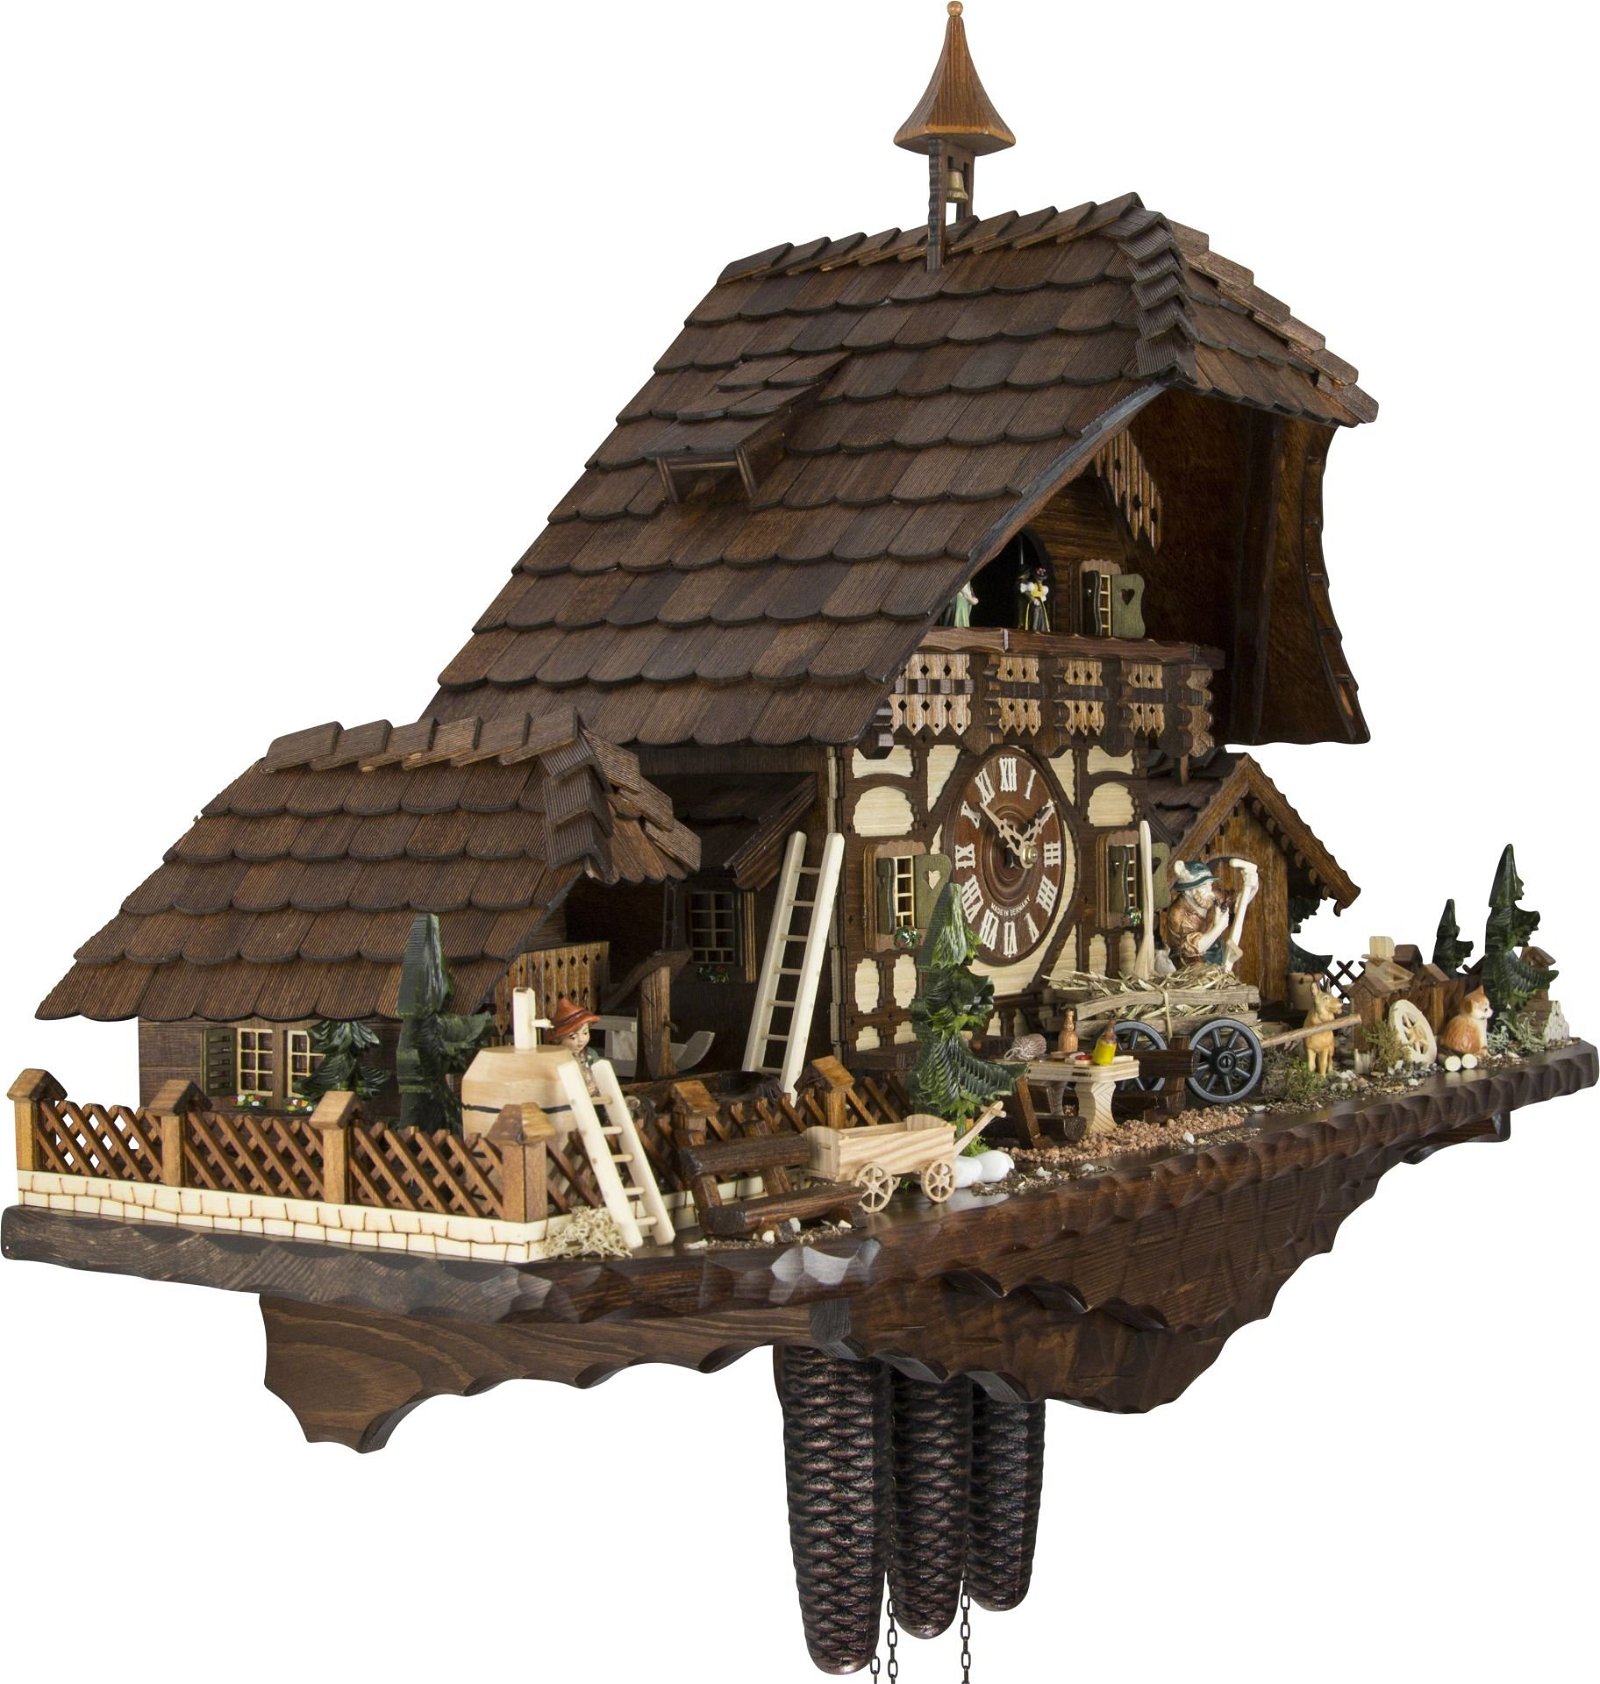 Cuckoo Clock Chalet Style 8 Day Movement 55cm by August Schwer